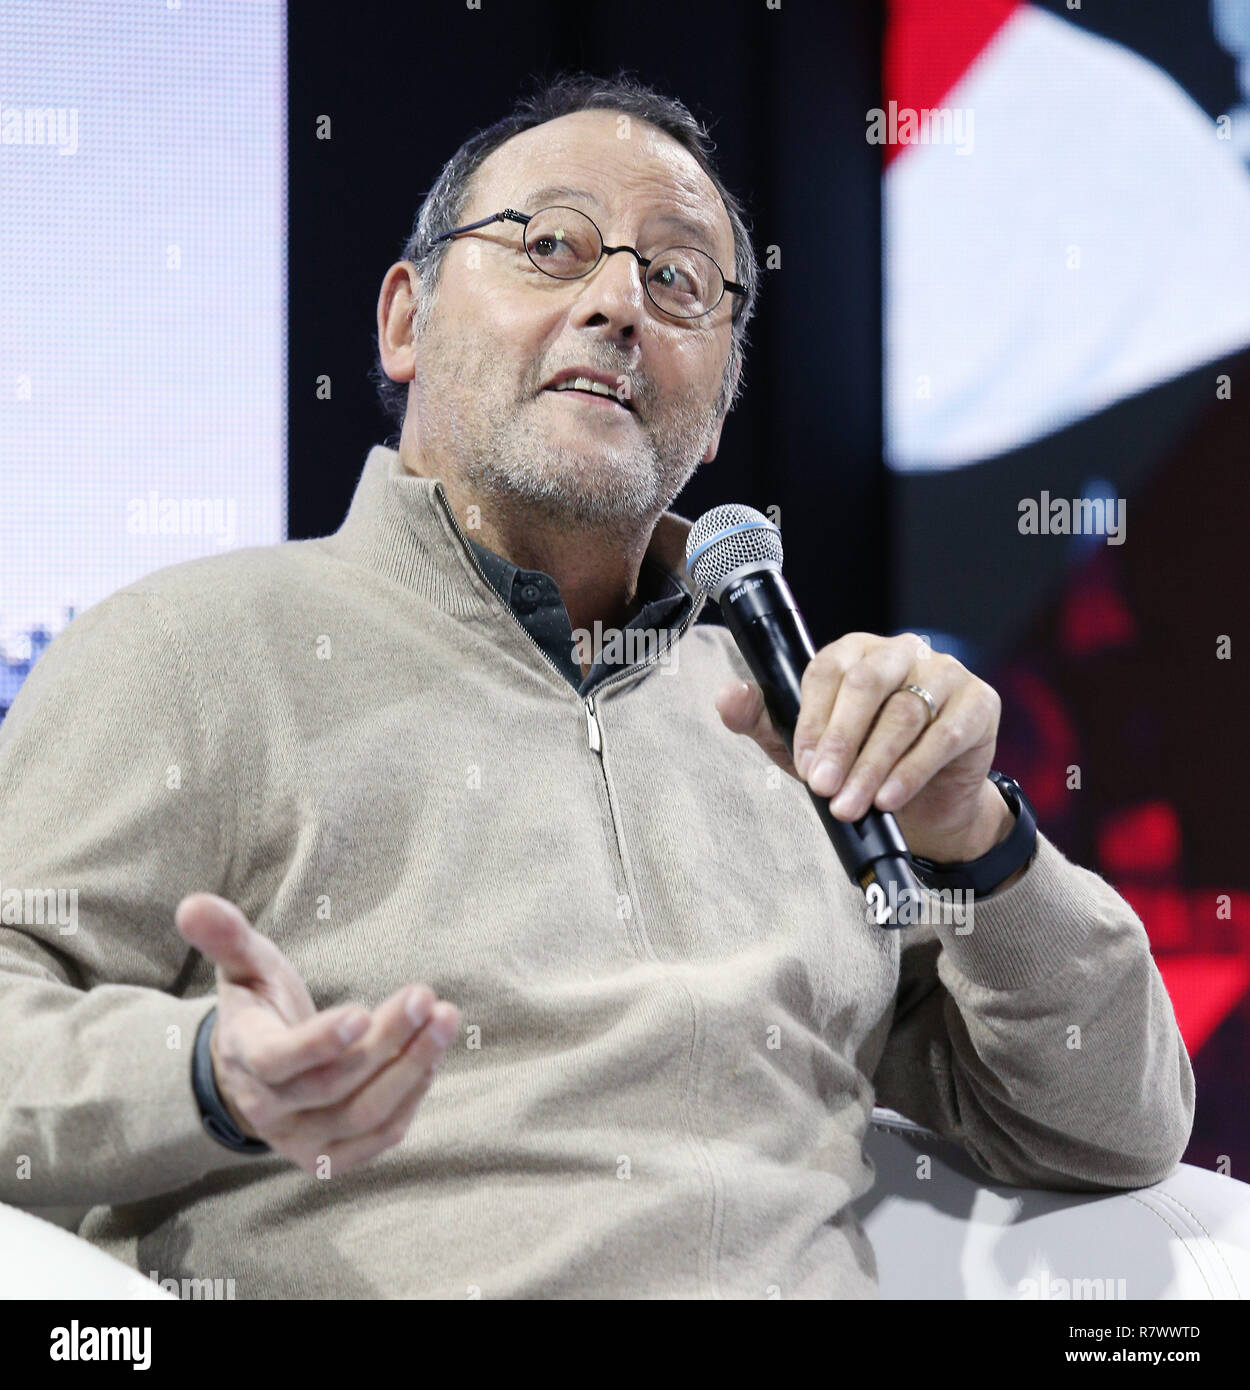 Krakow, Poland. 11th Dec, 2018. December 11, 2018 - Krakow, Poland - Actor JEAN RENO visited Krakow. He met with fans and students, visited the city and learned about Polish customs and Christmas dishes. Credit: Damian Klamka/ZUMA Wire/Alamy Live News Stock Photo